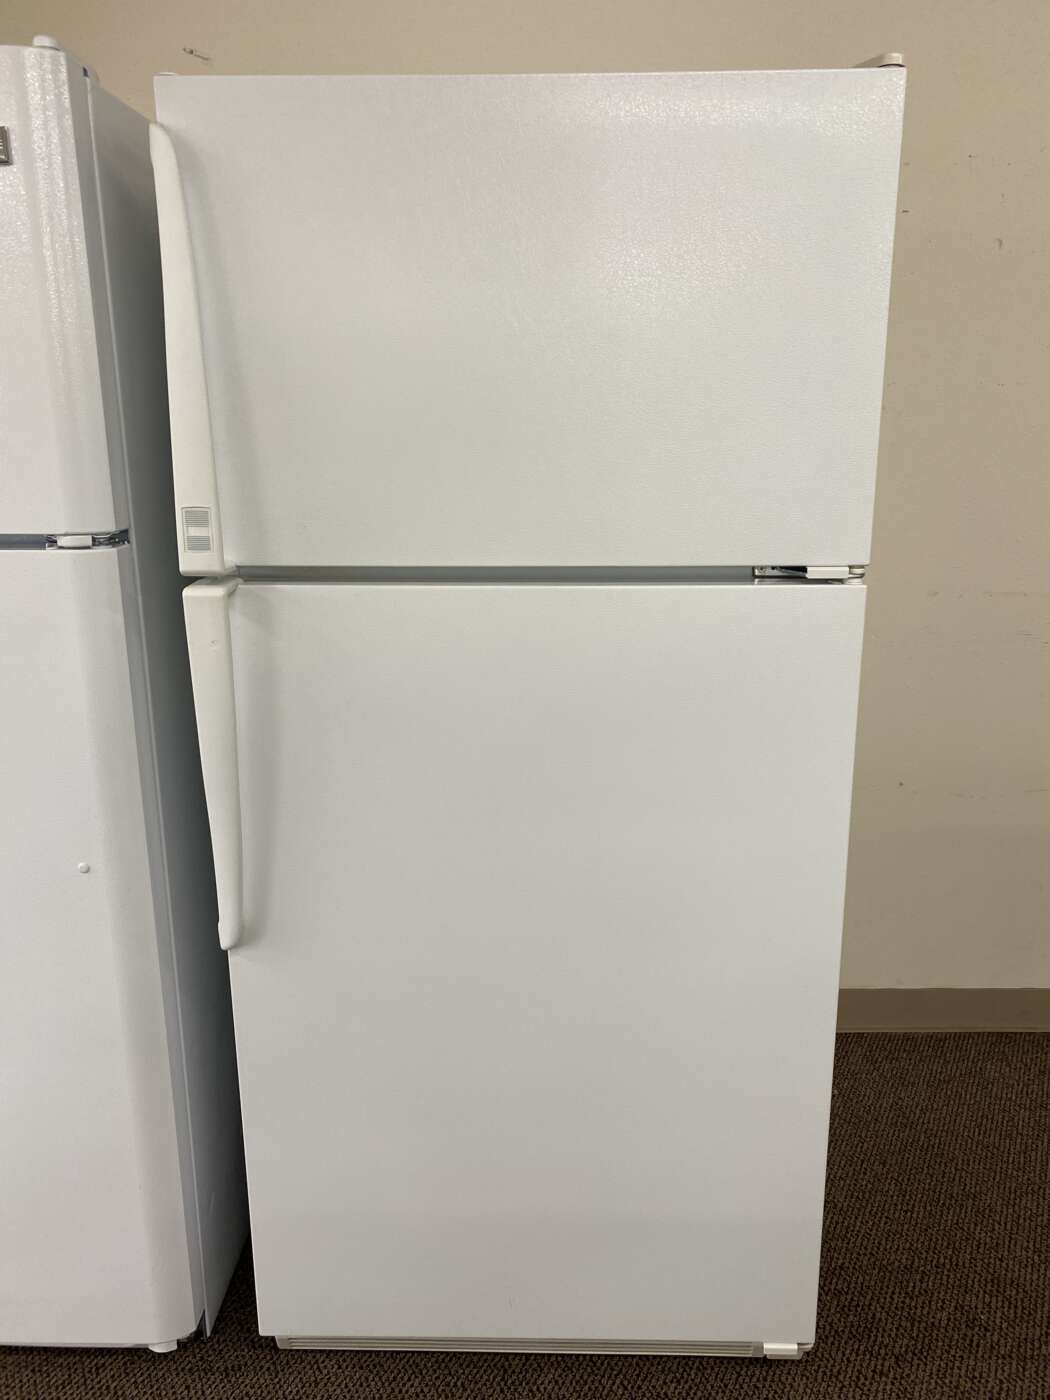 Reconditioned AMANA 18 Cu. Ft. Top-Freezer Refrigerator with IceMaker – White